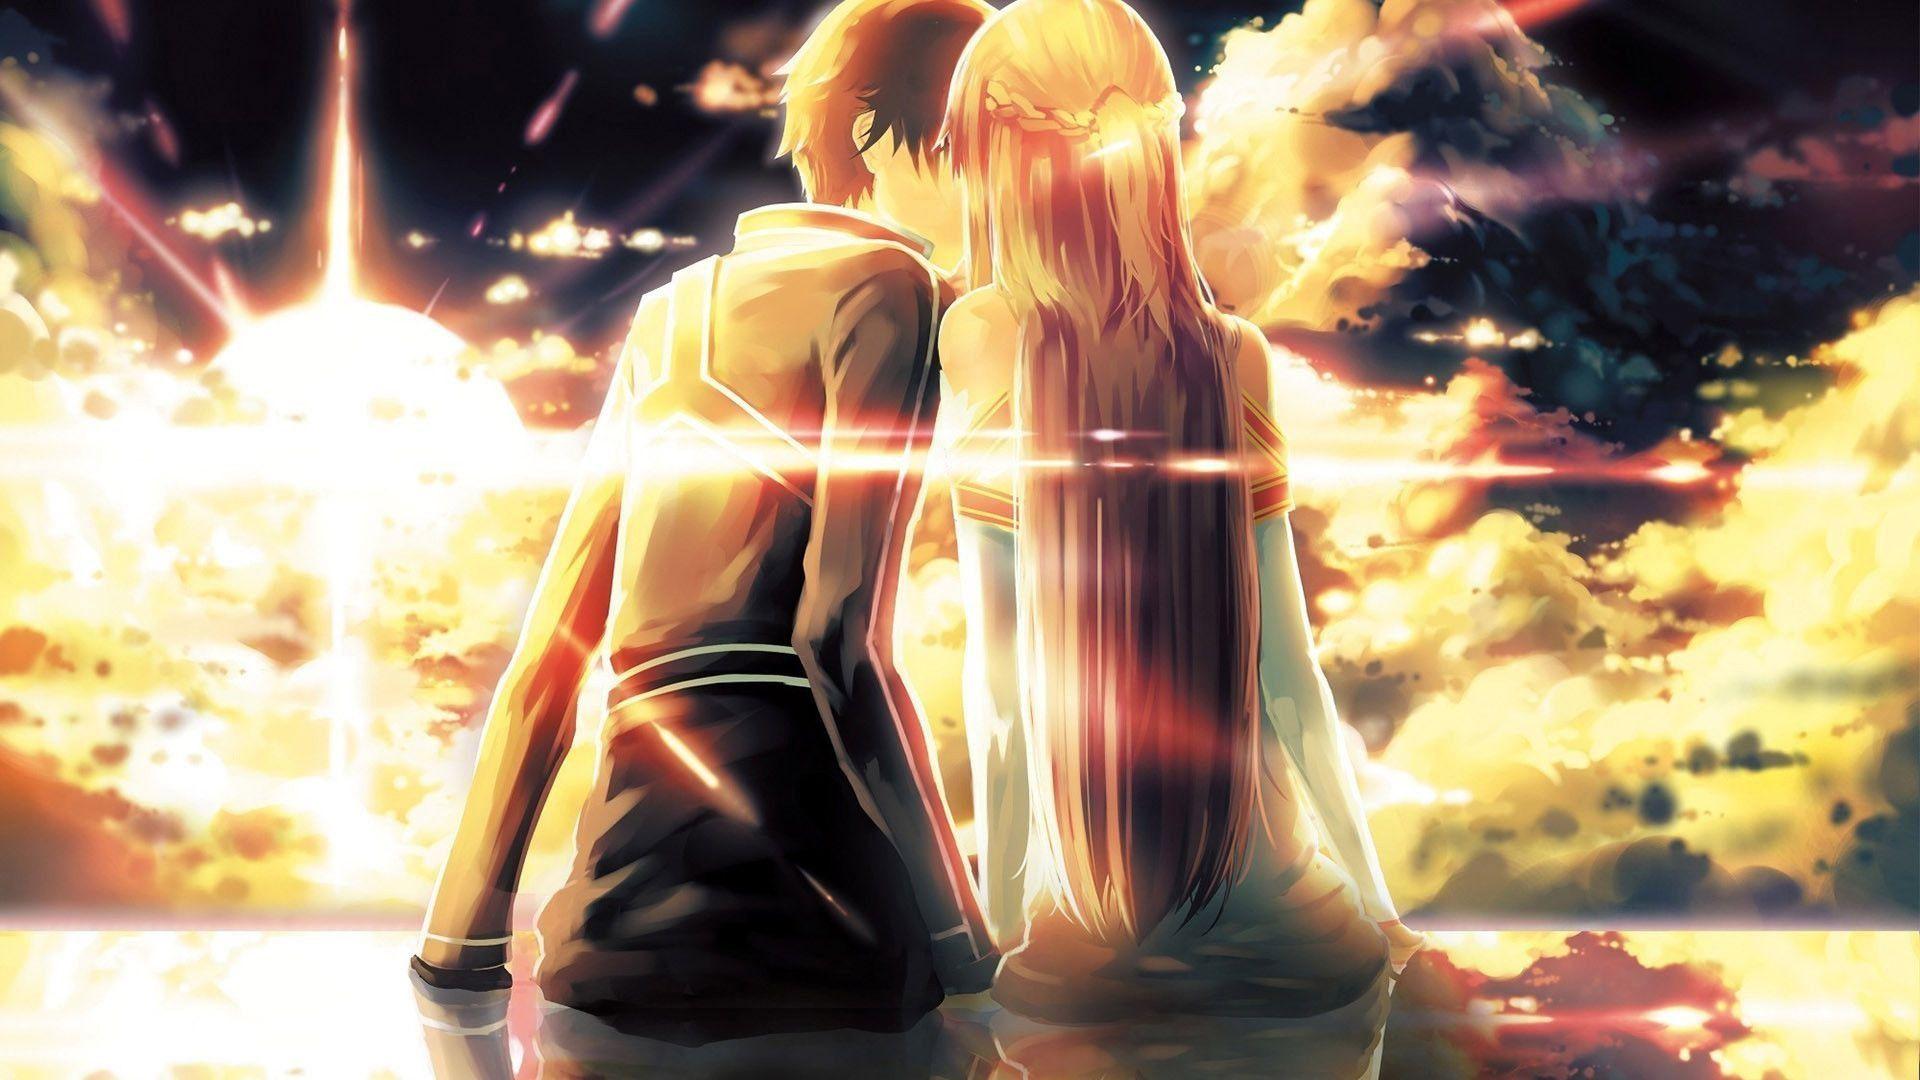 Anime Couple Kissing HD Wallpapers Wallpapers